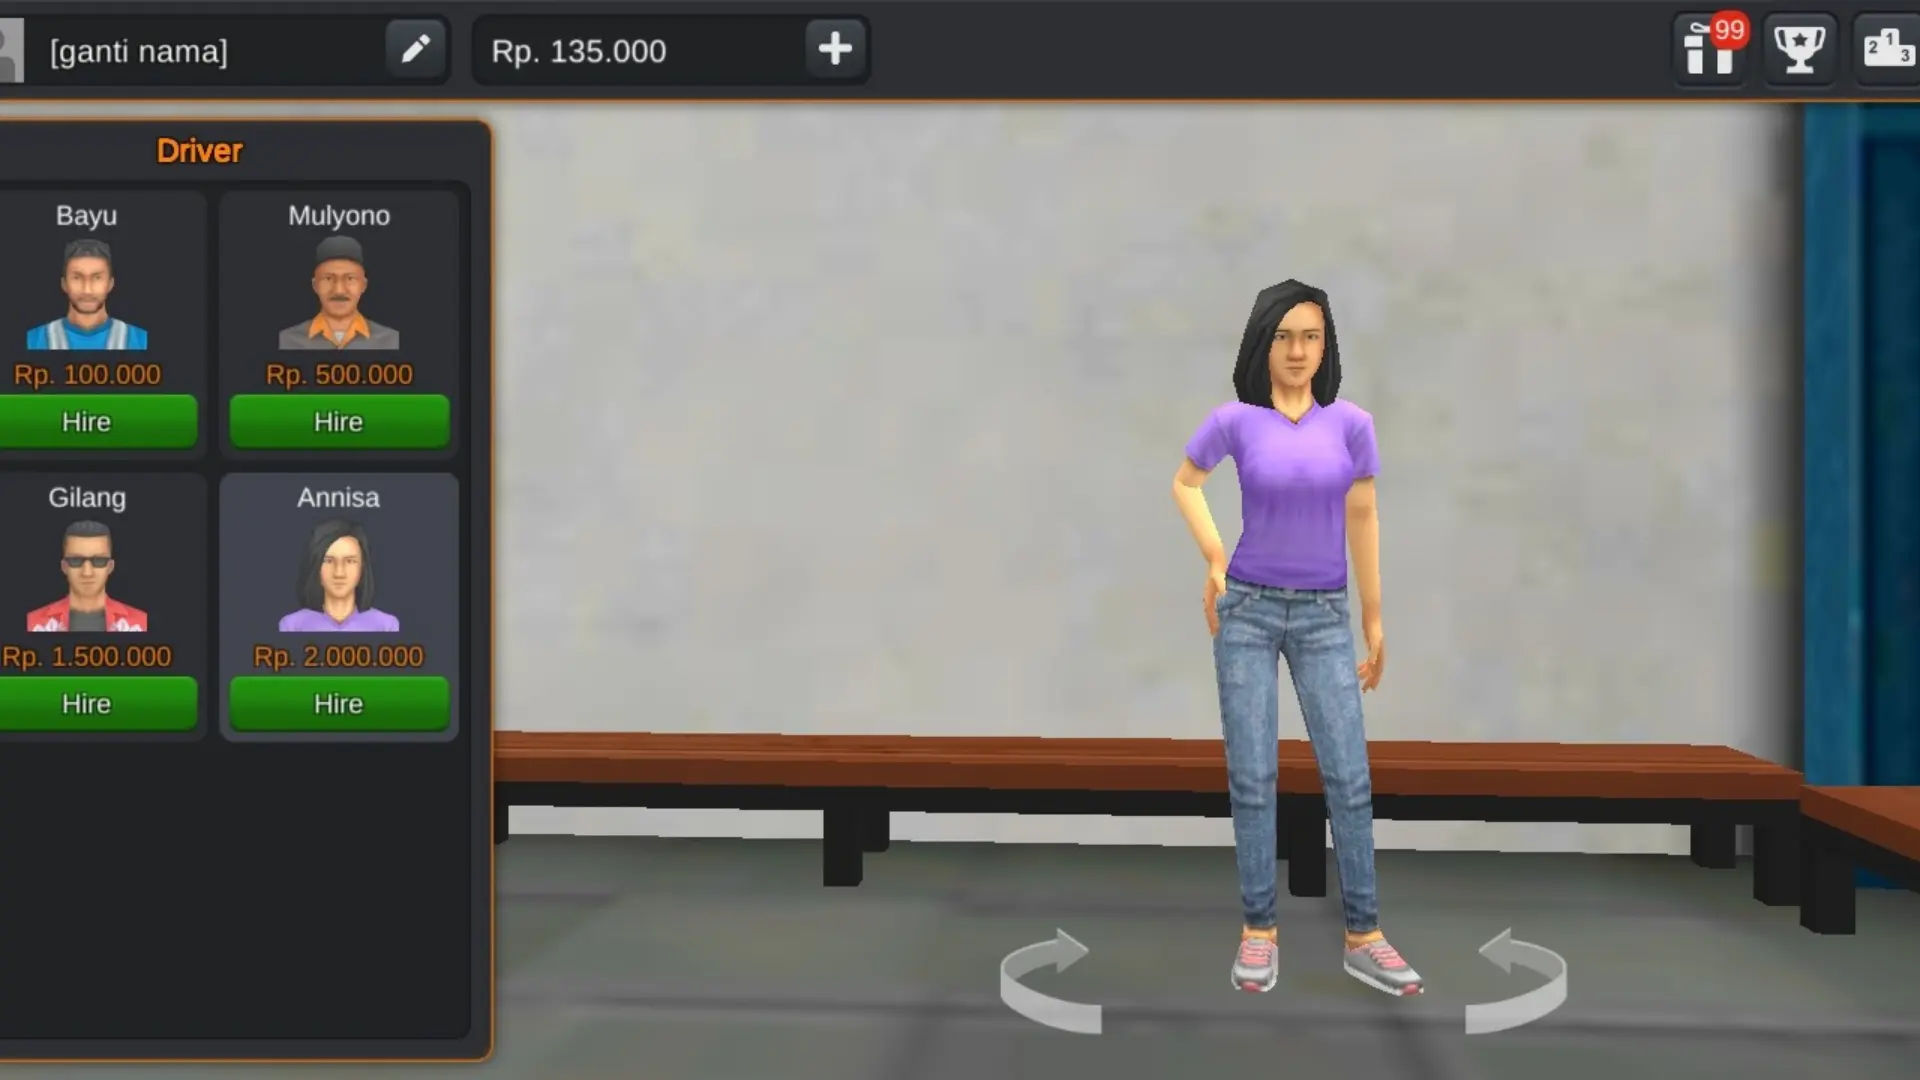 Screenshots from the bus simulator Indonesia mod APK game showing multiple driver avatars to choose